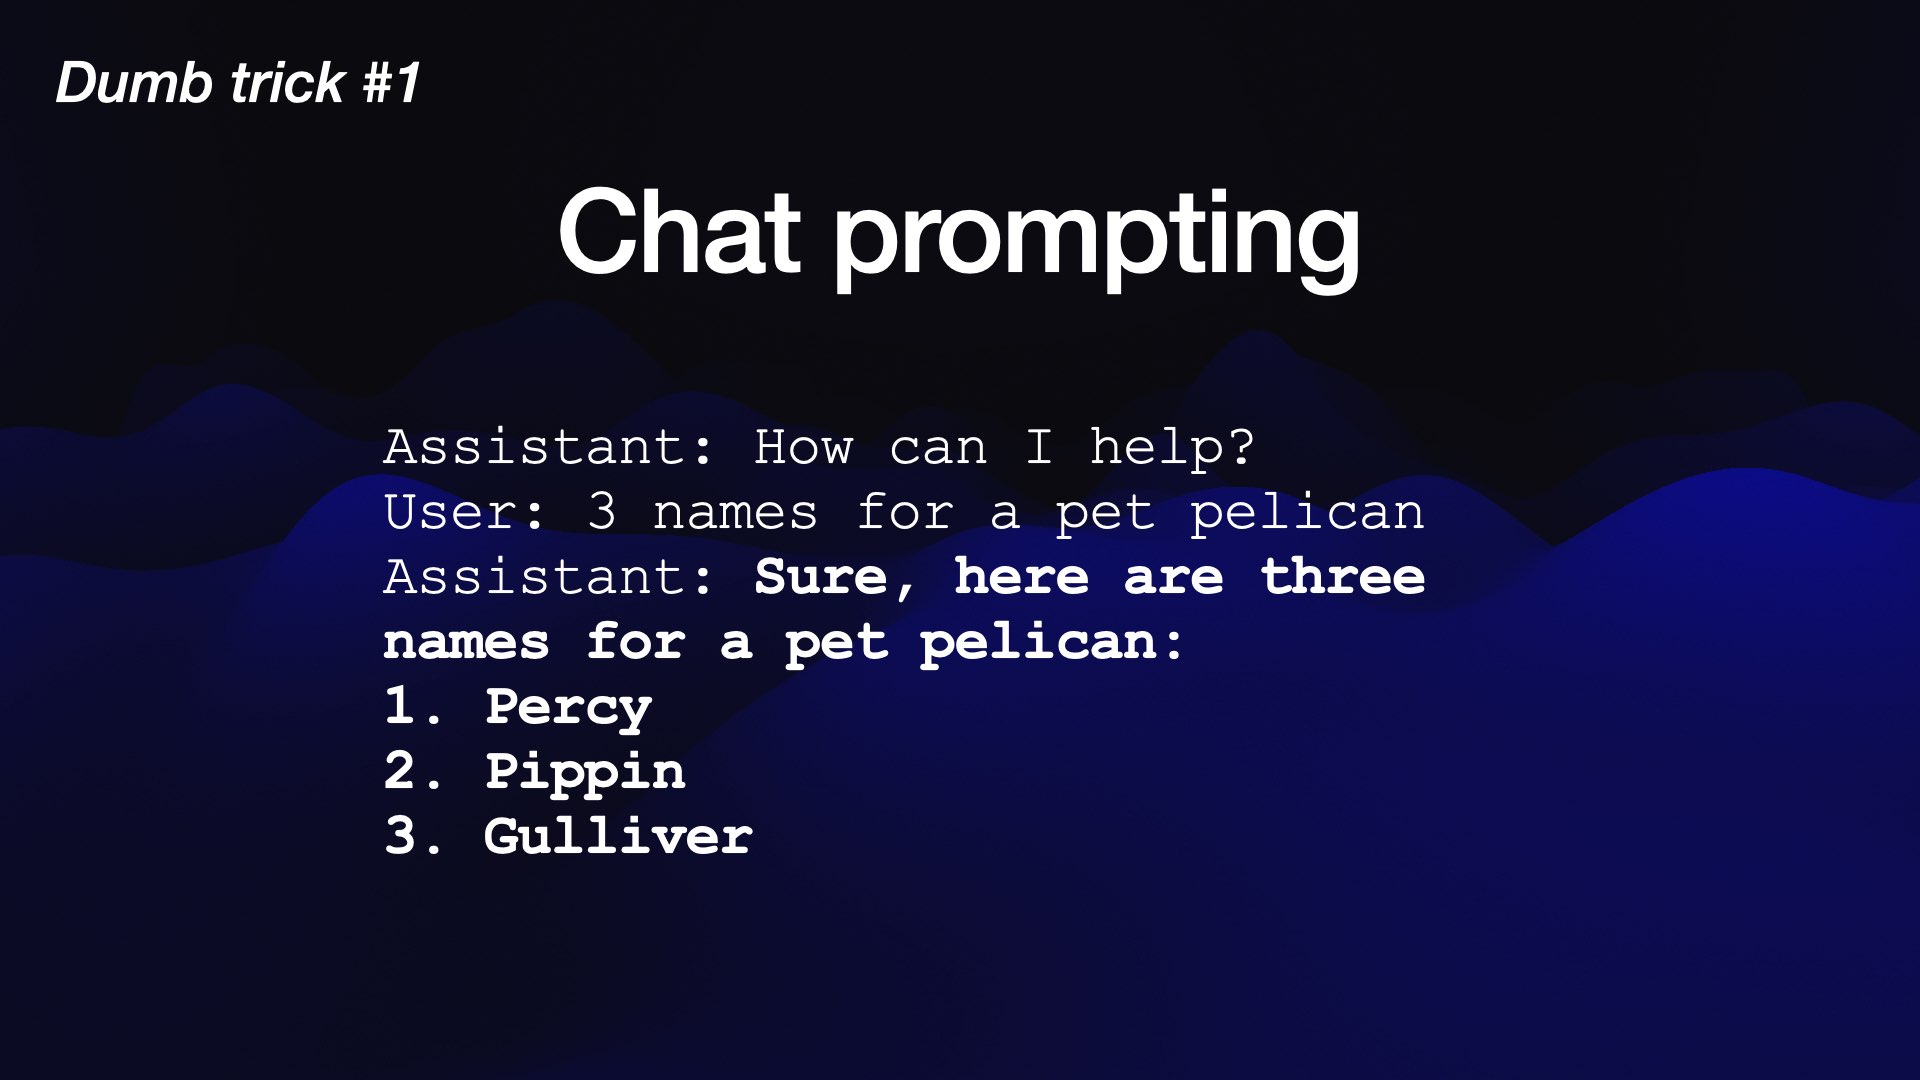 Assistant: Sure, here are three names for a pet pelican: 1. Percy 2. Pippin 3. Gulliver 